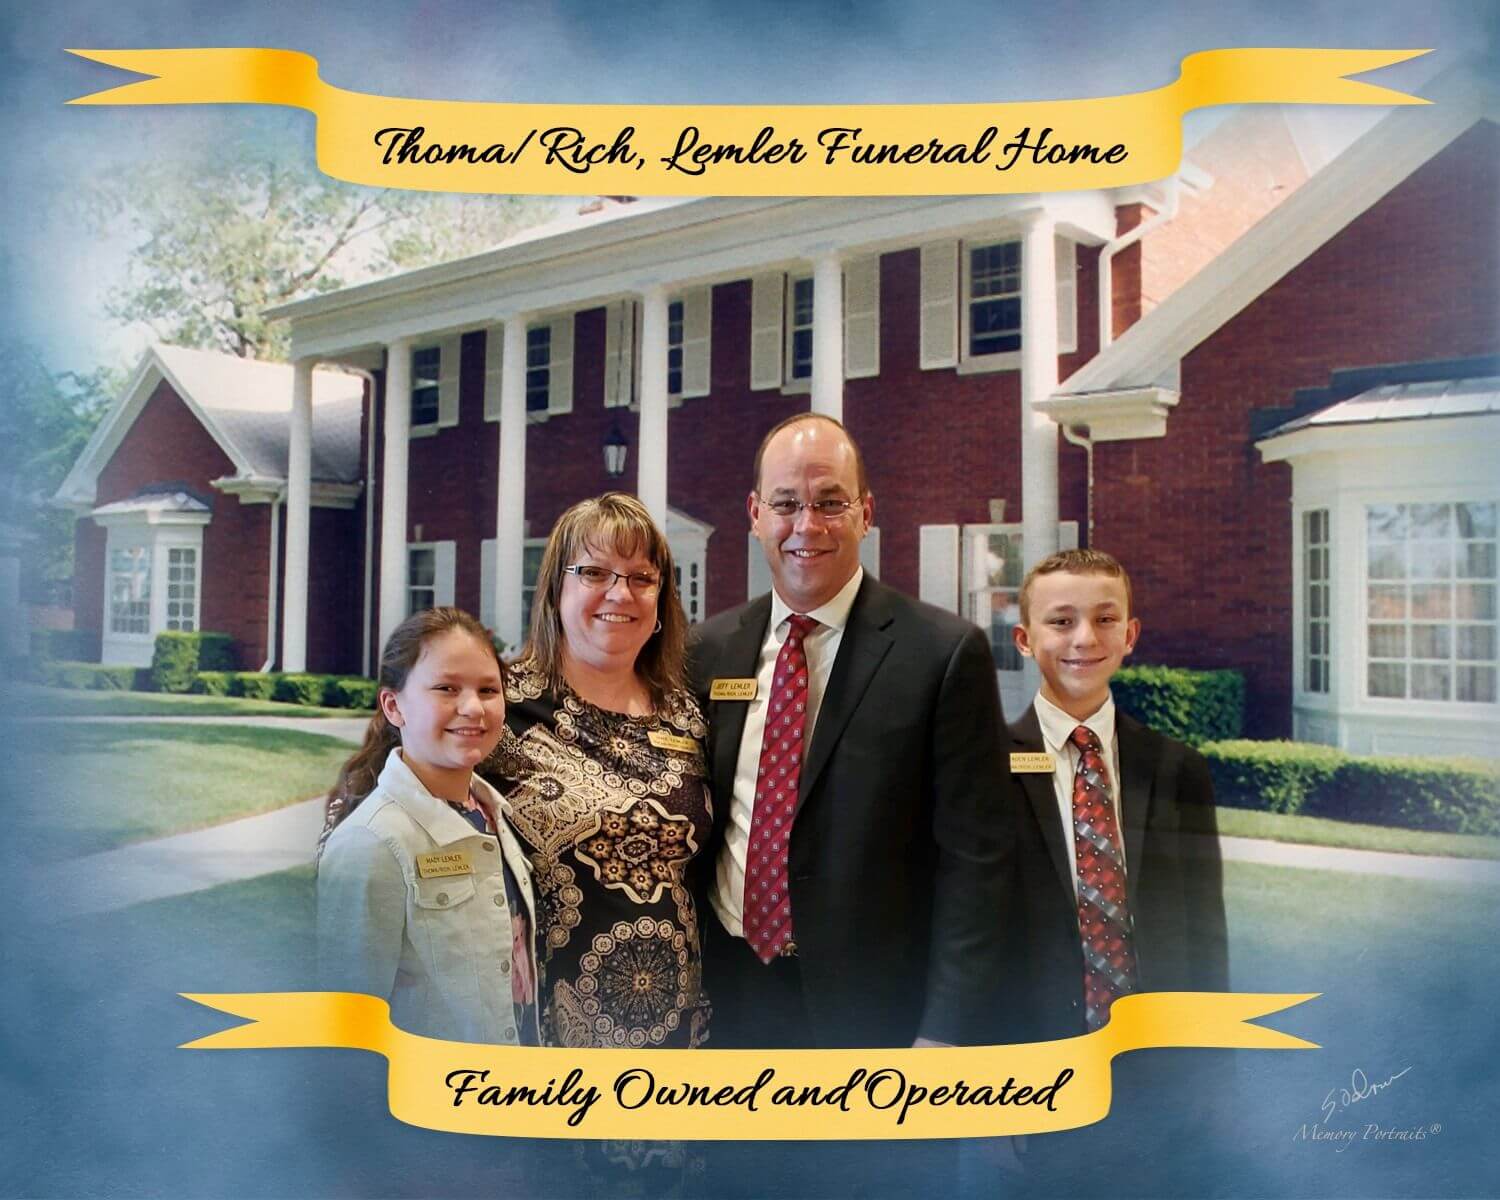 Thoma/Rich, Lemler Funeral Home